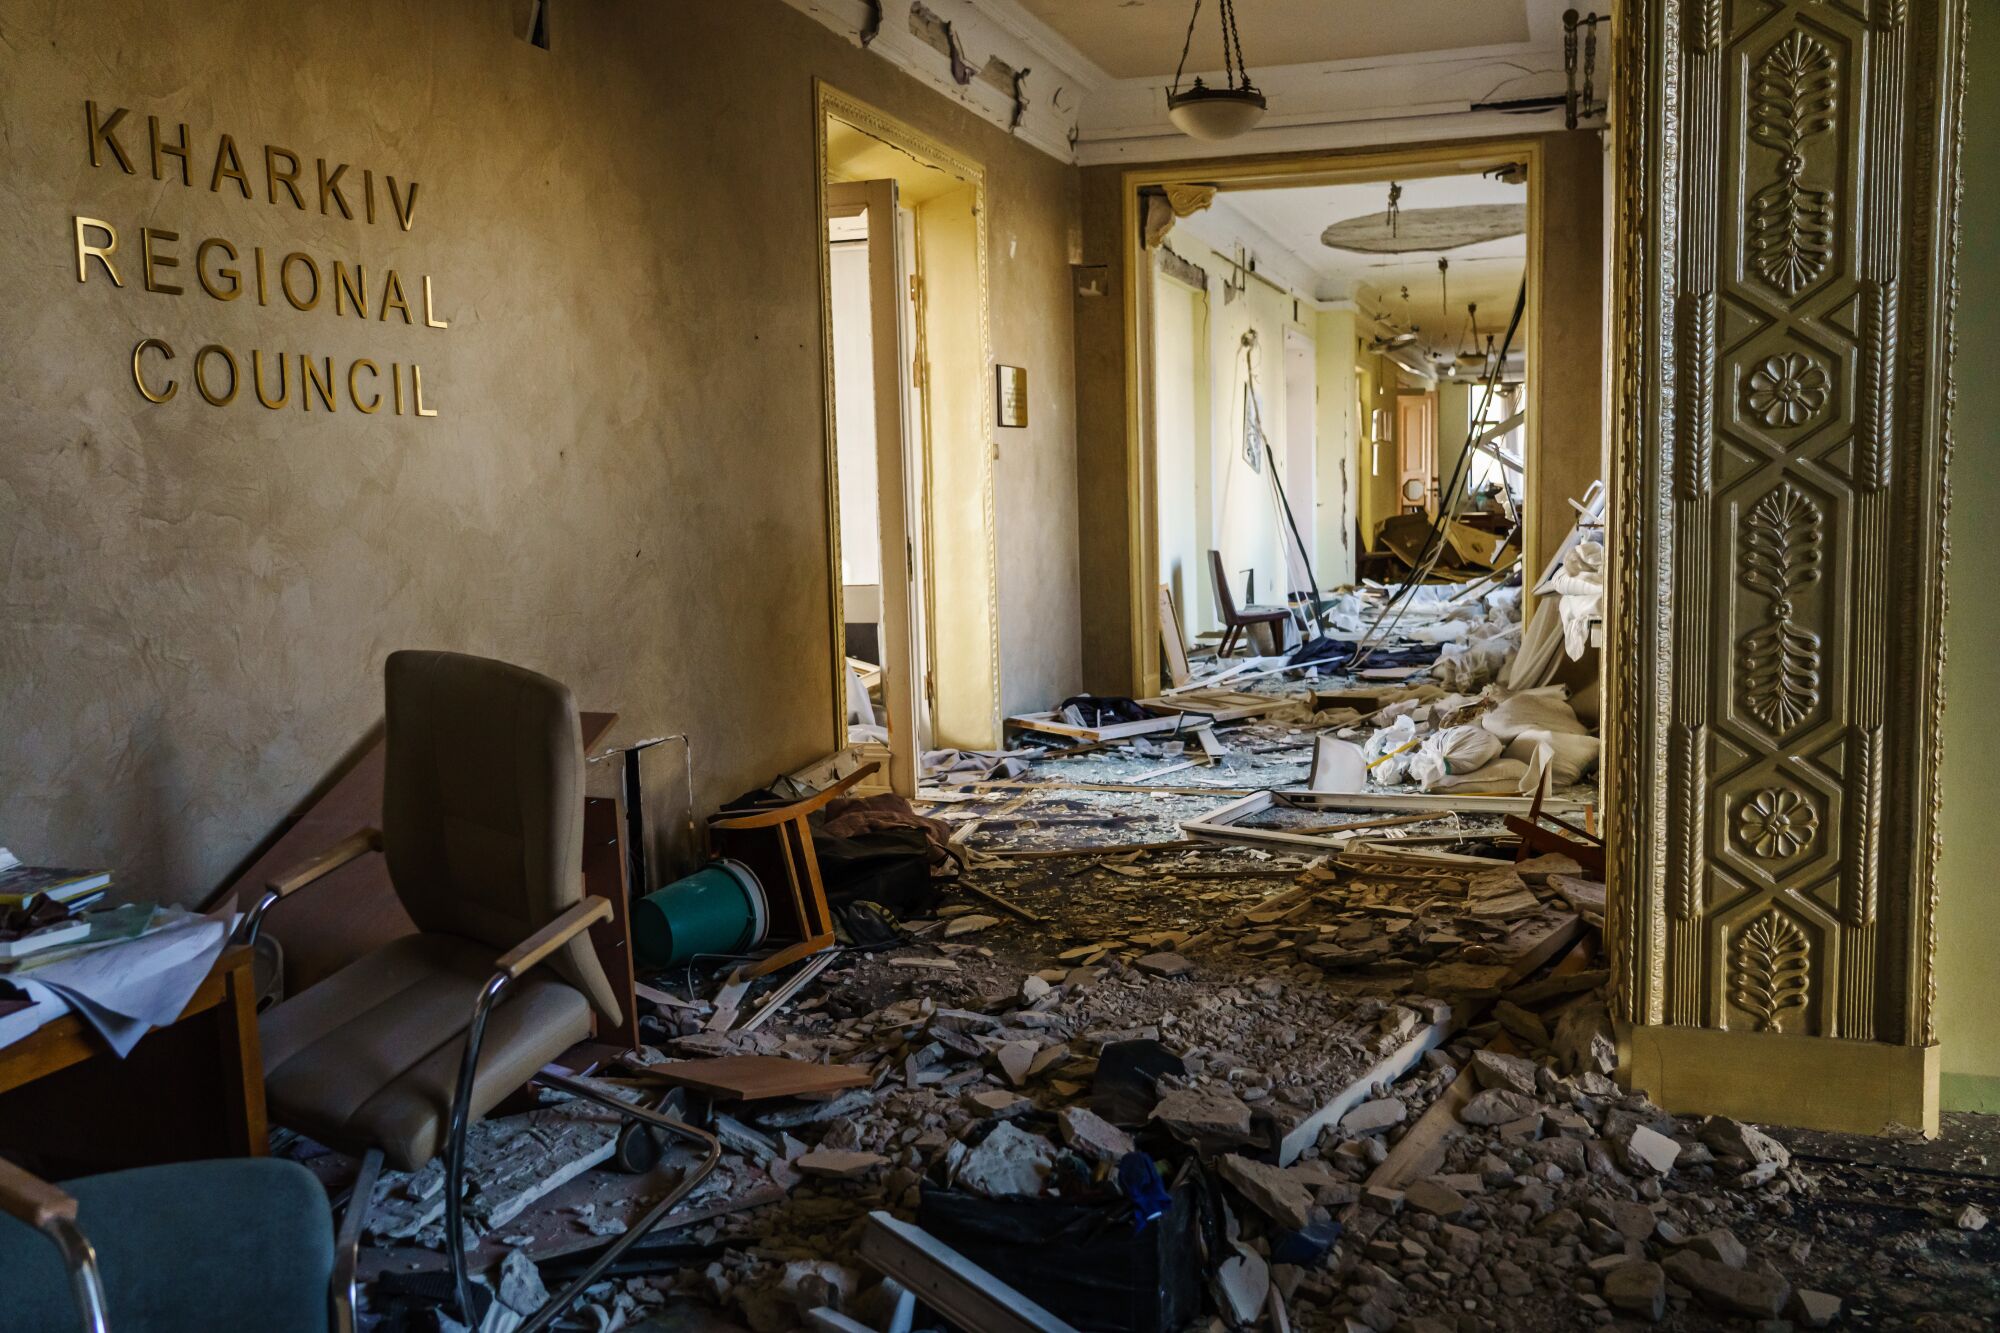 Inside the Kharkiv Regional Administration building, after it was destroyed by Russian bombardments.